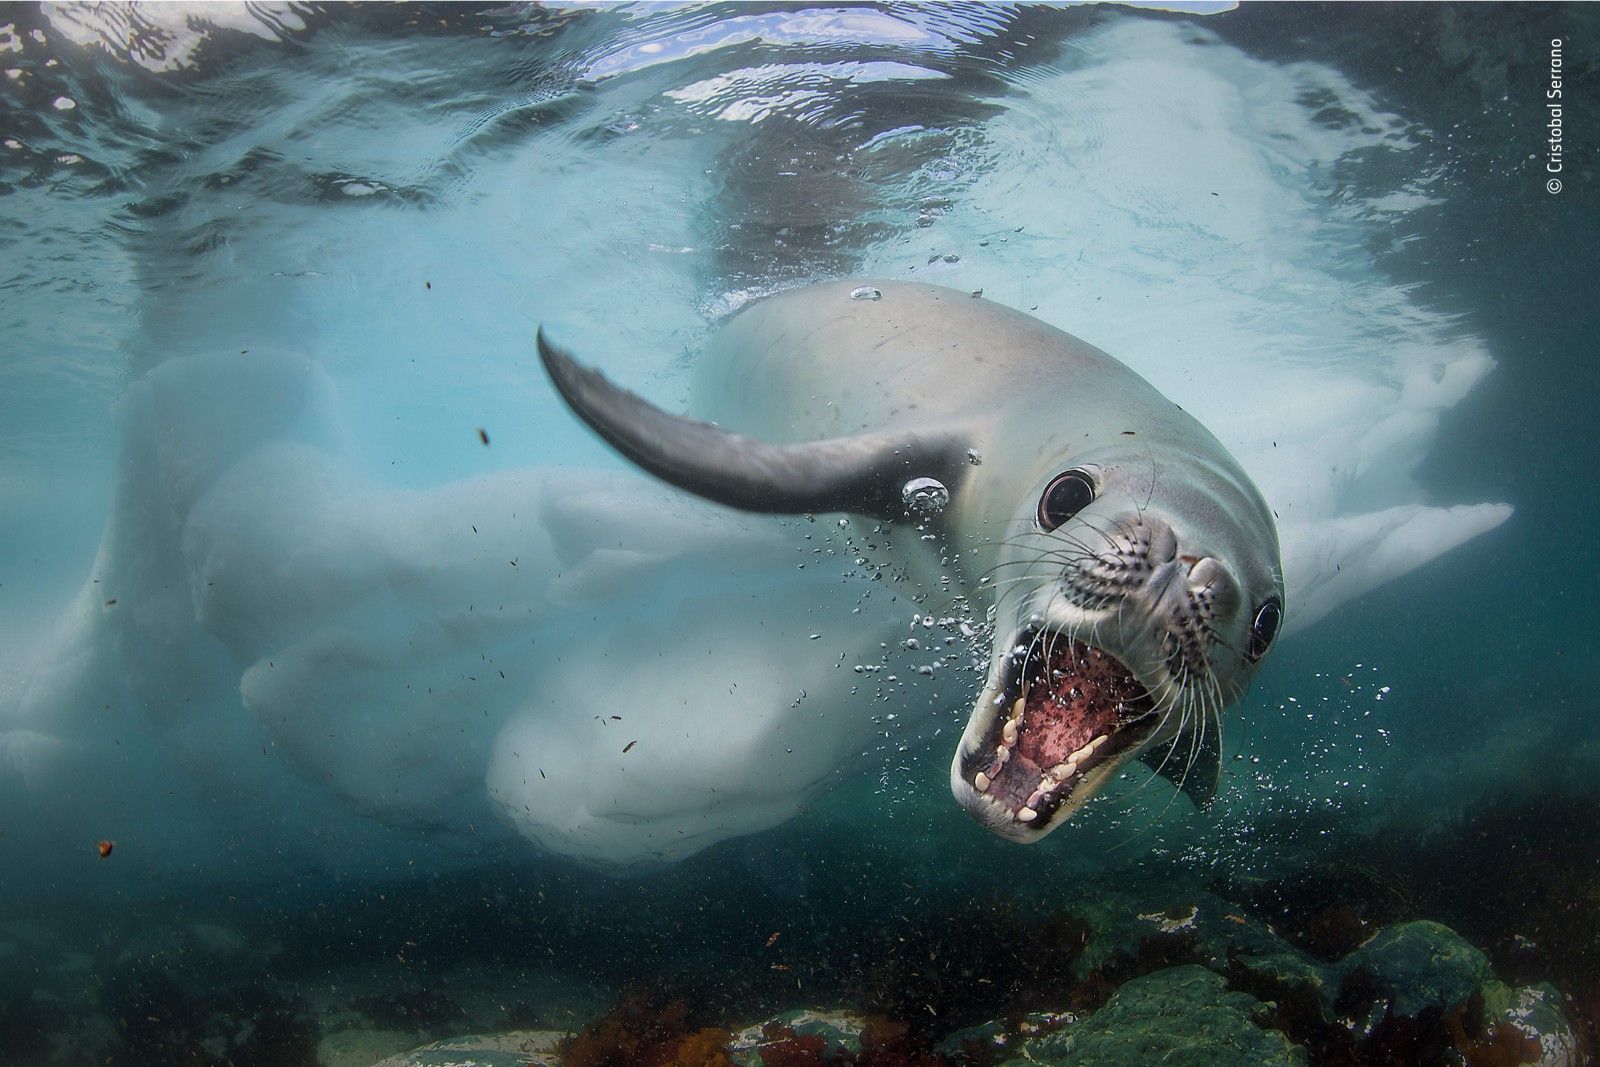 Incredible Images From The Wildlife Photographer Of The Year Competition image 1